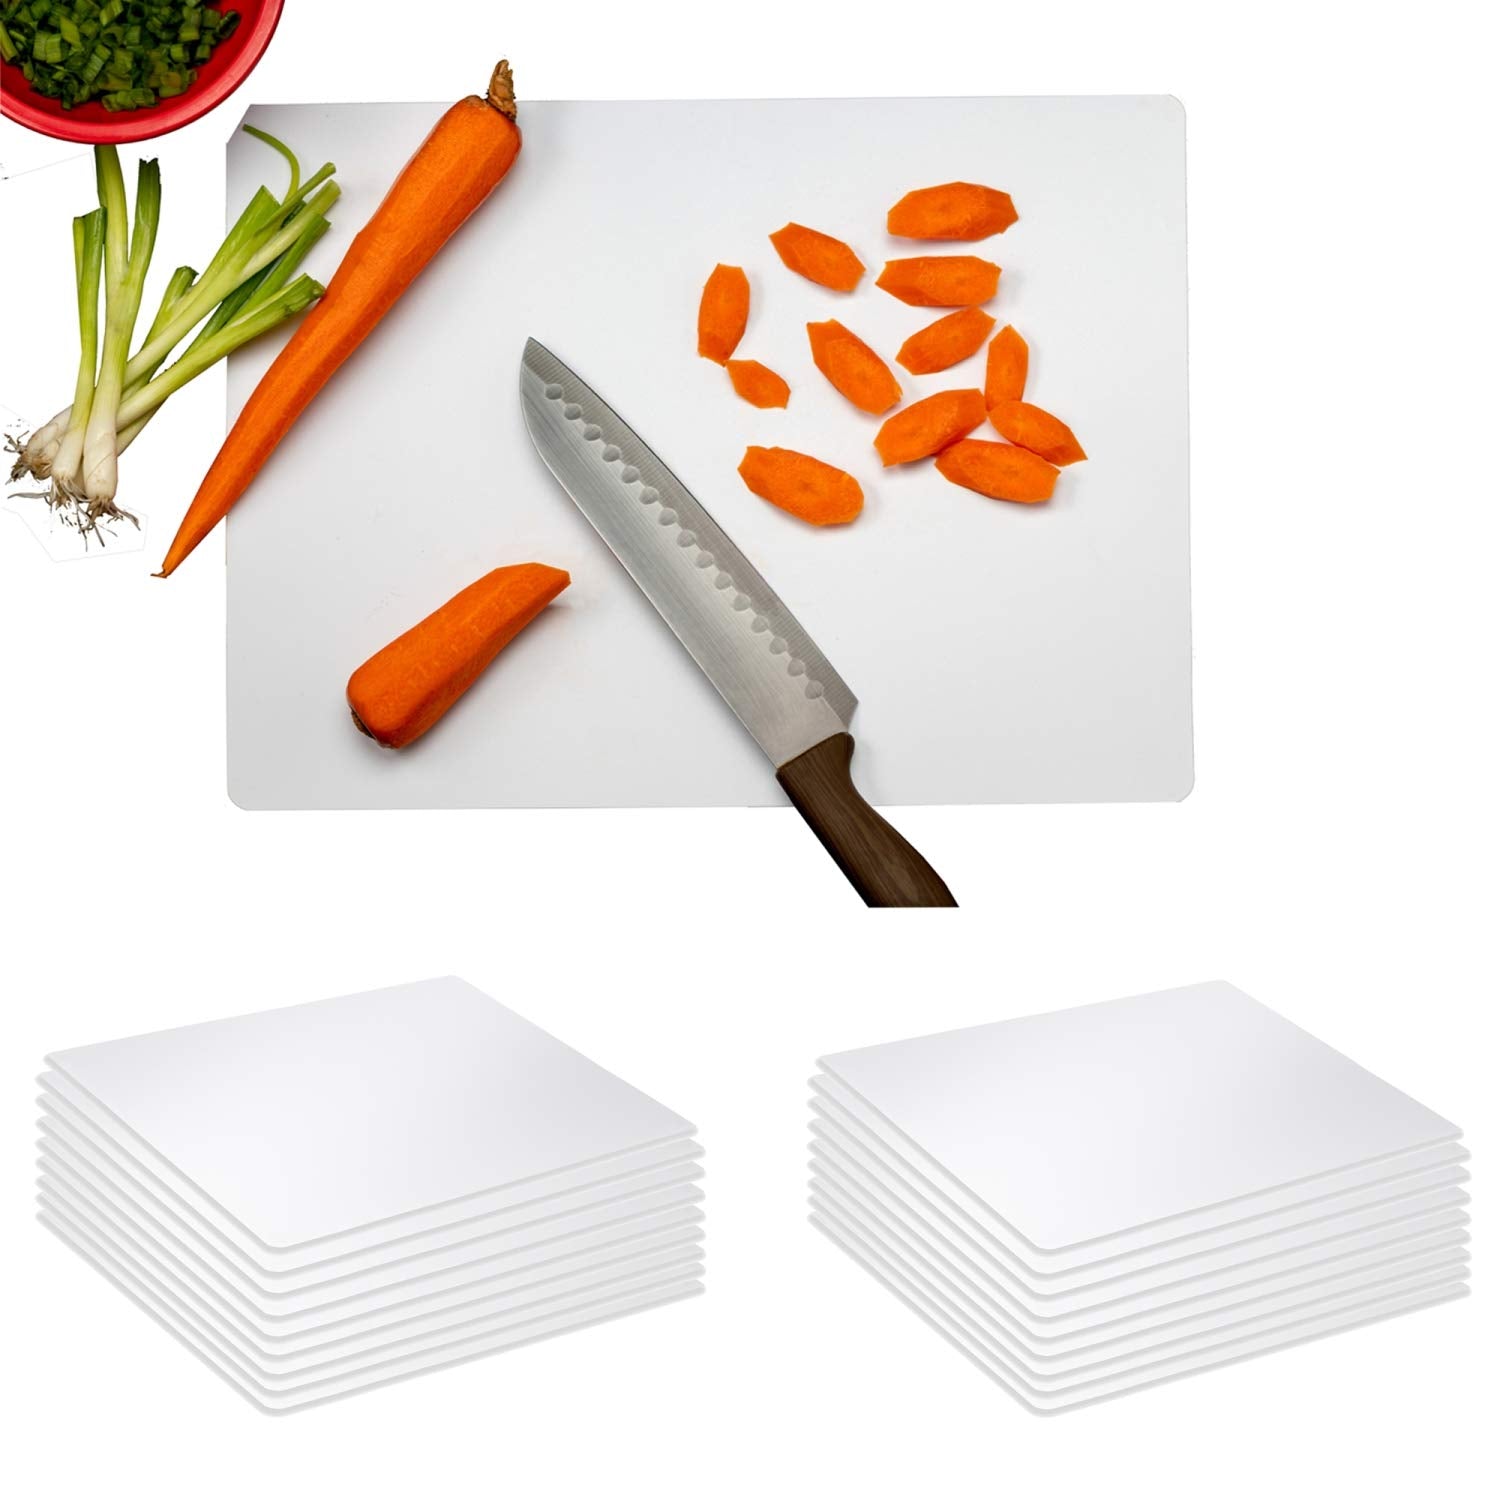 12 In. X 17.5 In. Premium Quality Disposable Cutting Board | 25 Count